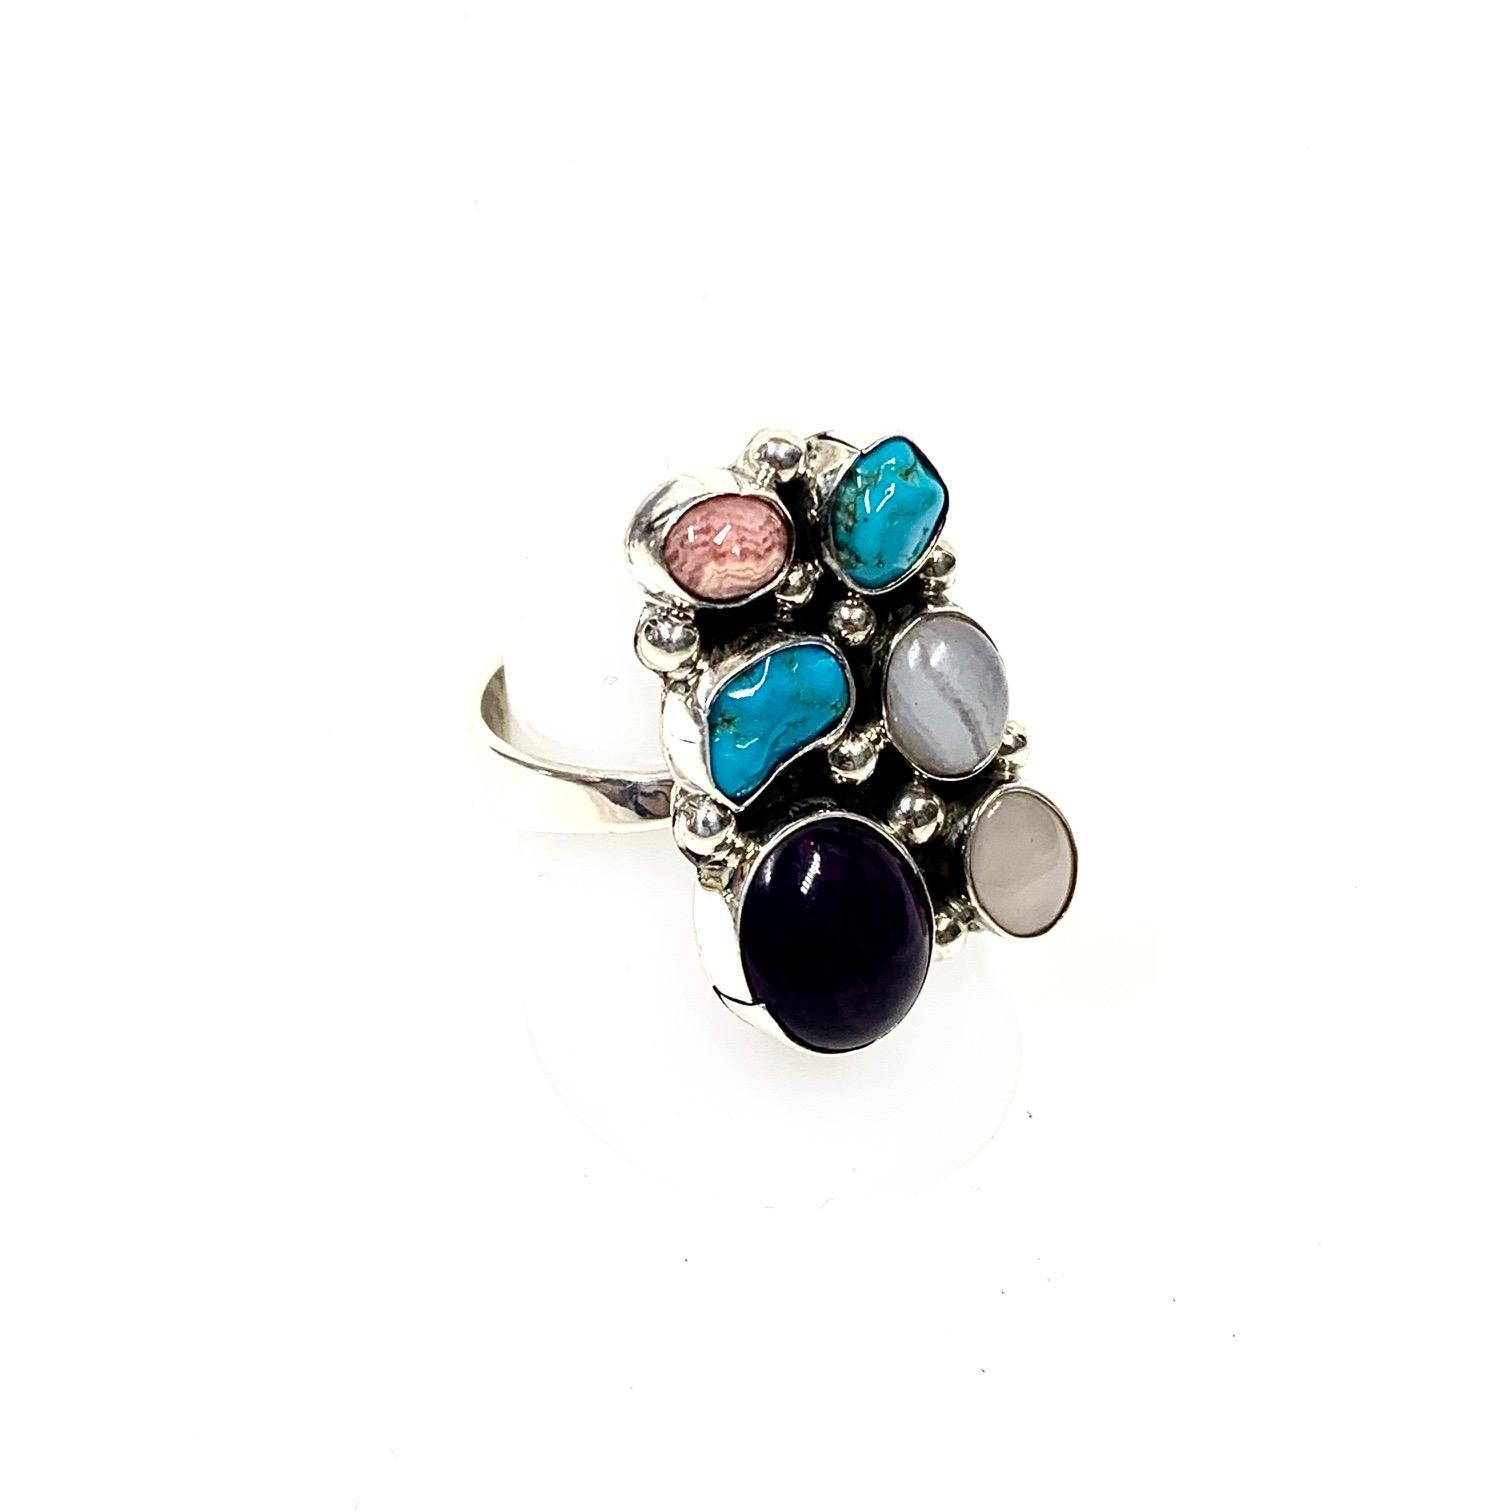 DC Navajo Sterling Silver 12 Gr. Multi Stone Ring CCRS23

New Vintage Navajo Ring adorned with Salmon Coral, Turquoise, Mother Pearl, Onyx, Opal Morado stones handcrafted by the renowned artist DC

•Measurements: 1.15 x 0.7 inches

•Weight: 12